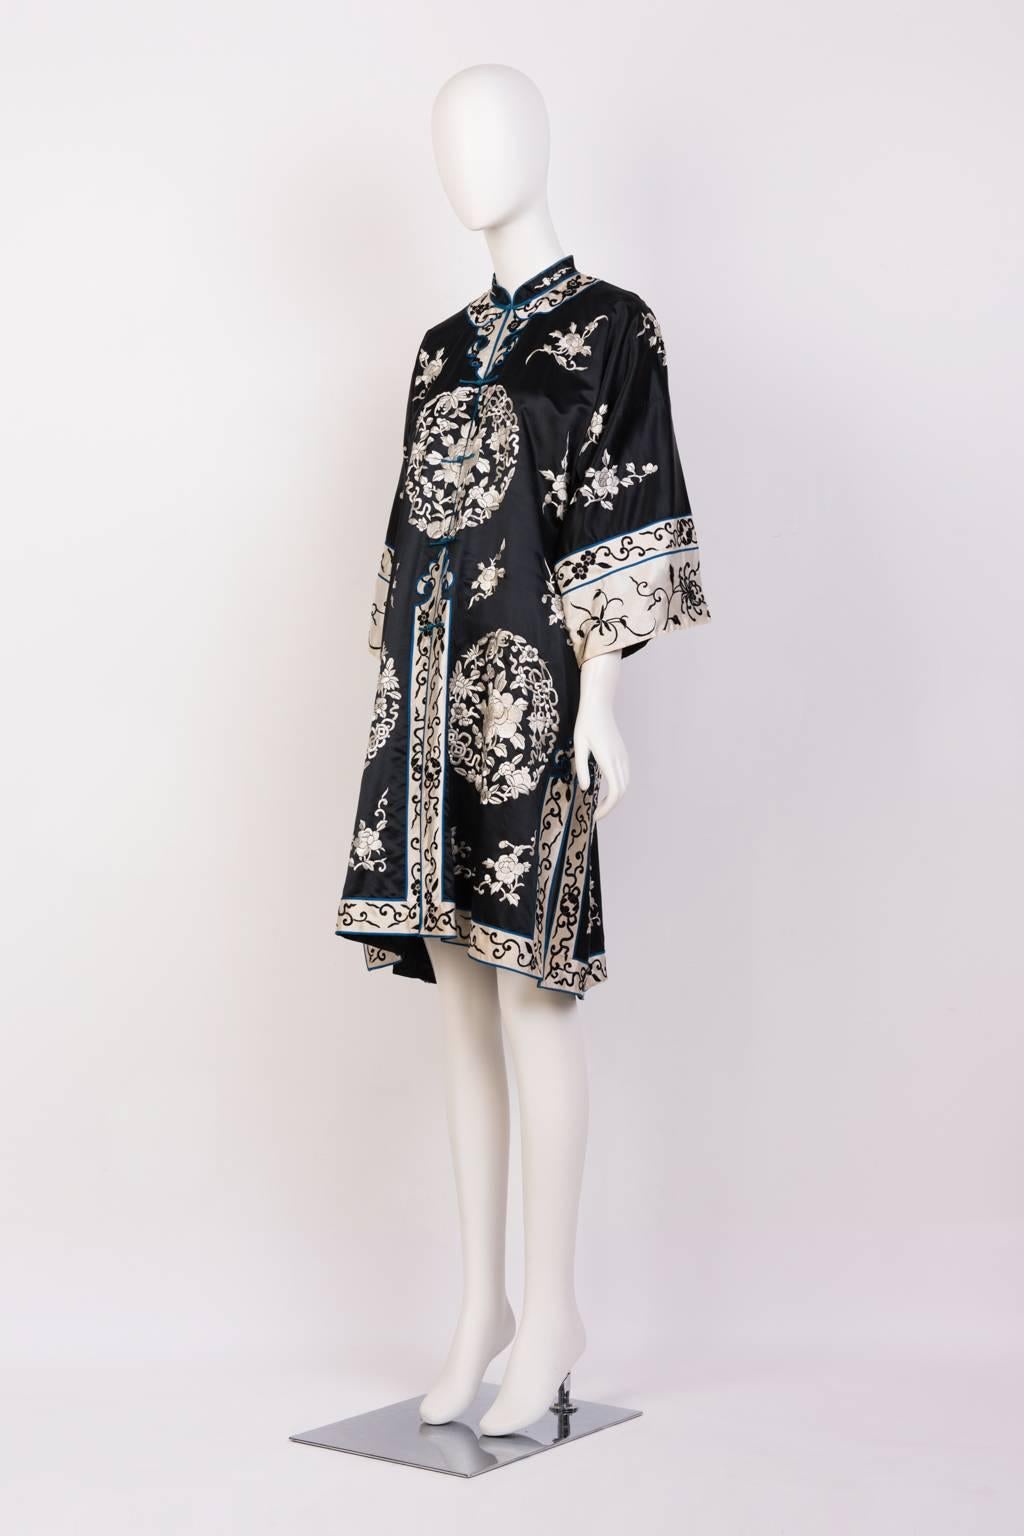 Llined, knee-length Robe, elegantly hand-embroidered with a peony motif, in jet black silk.